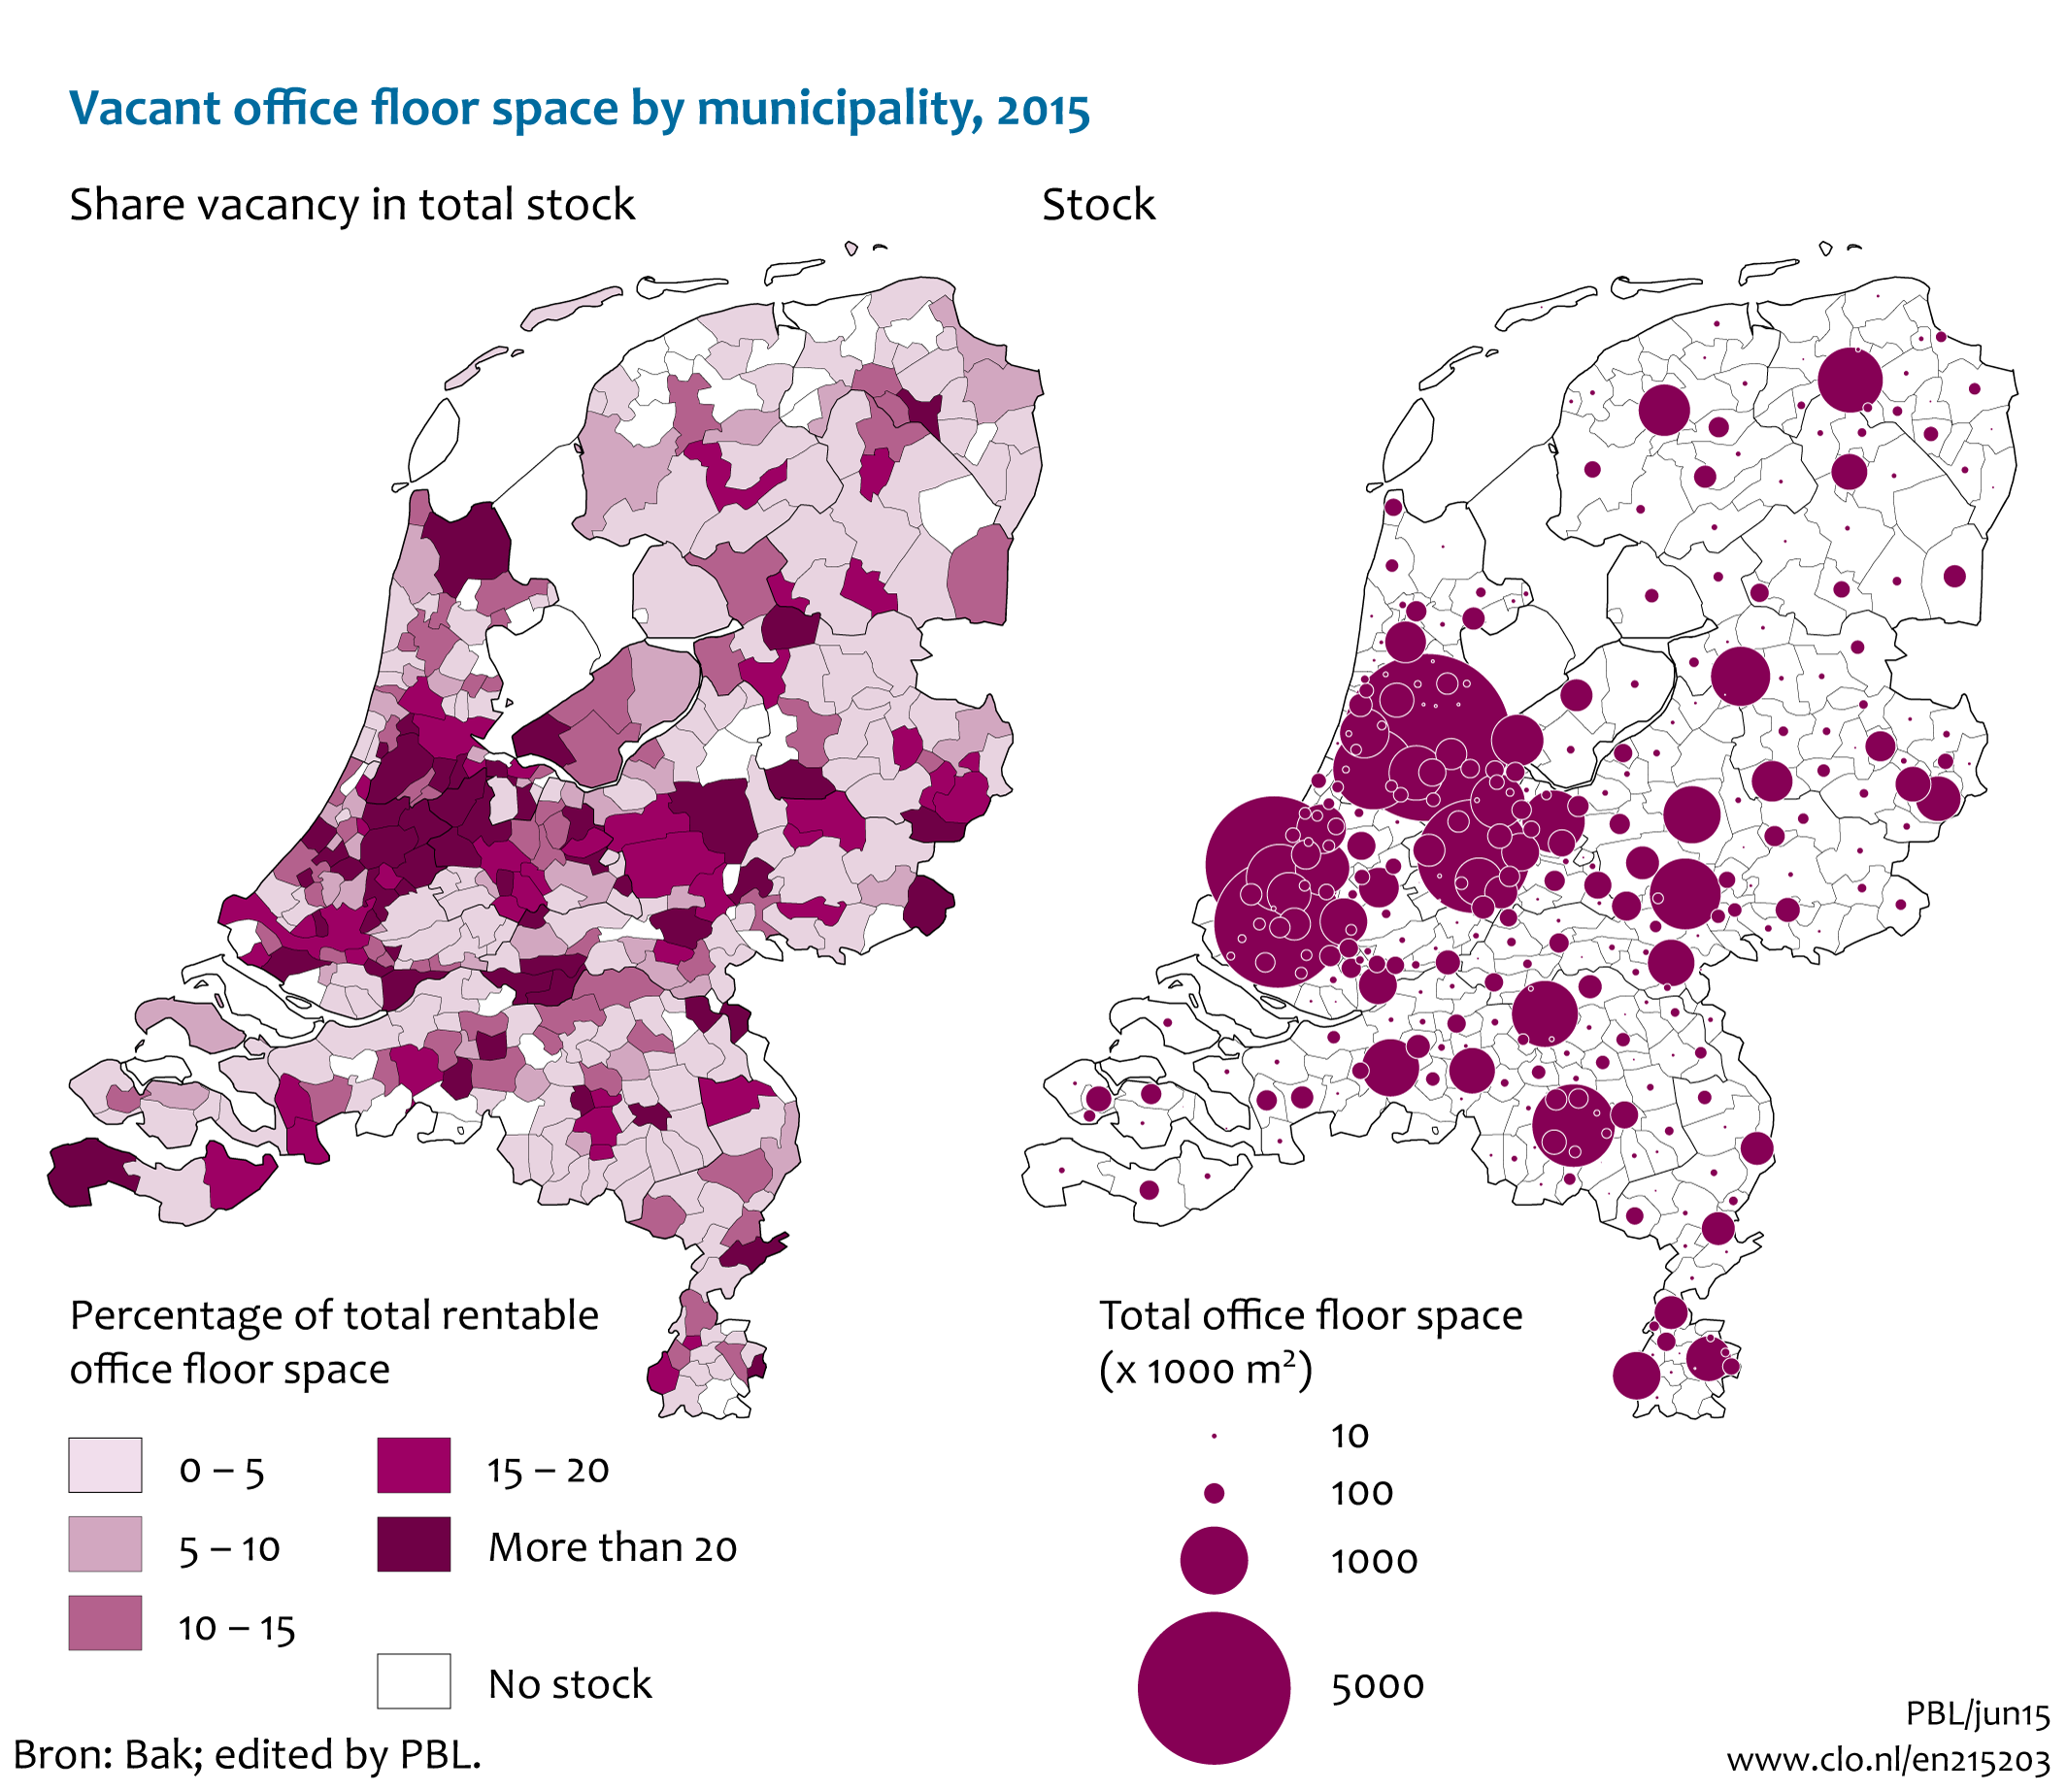 Image Vacant office floor space by municipality, 2015. The image is further explained in the text.